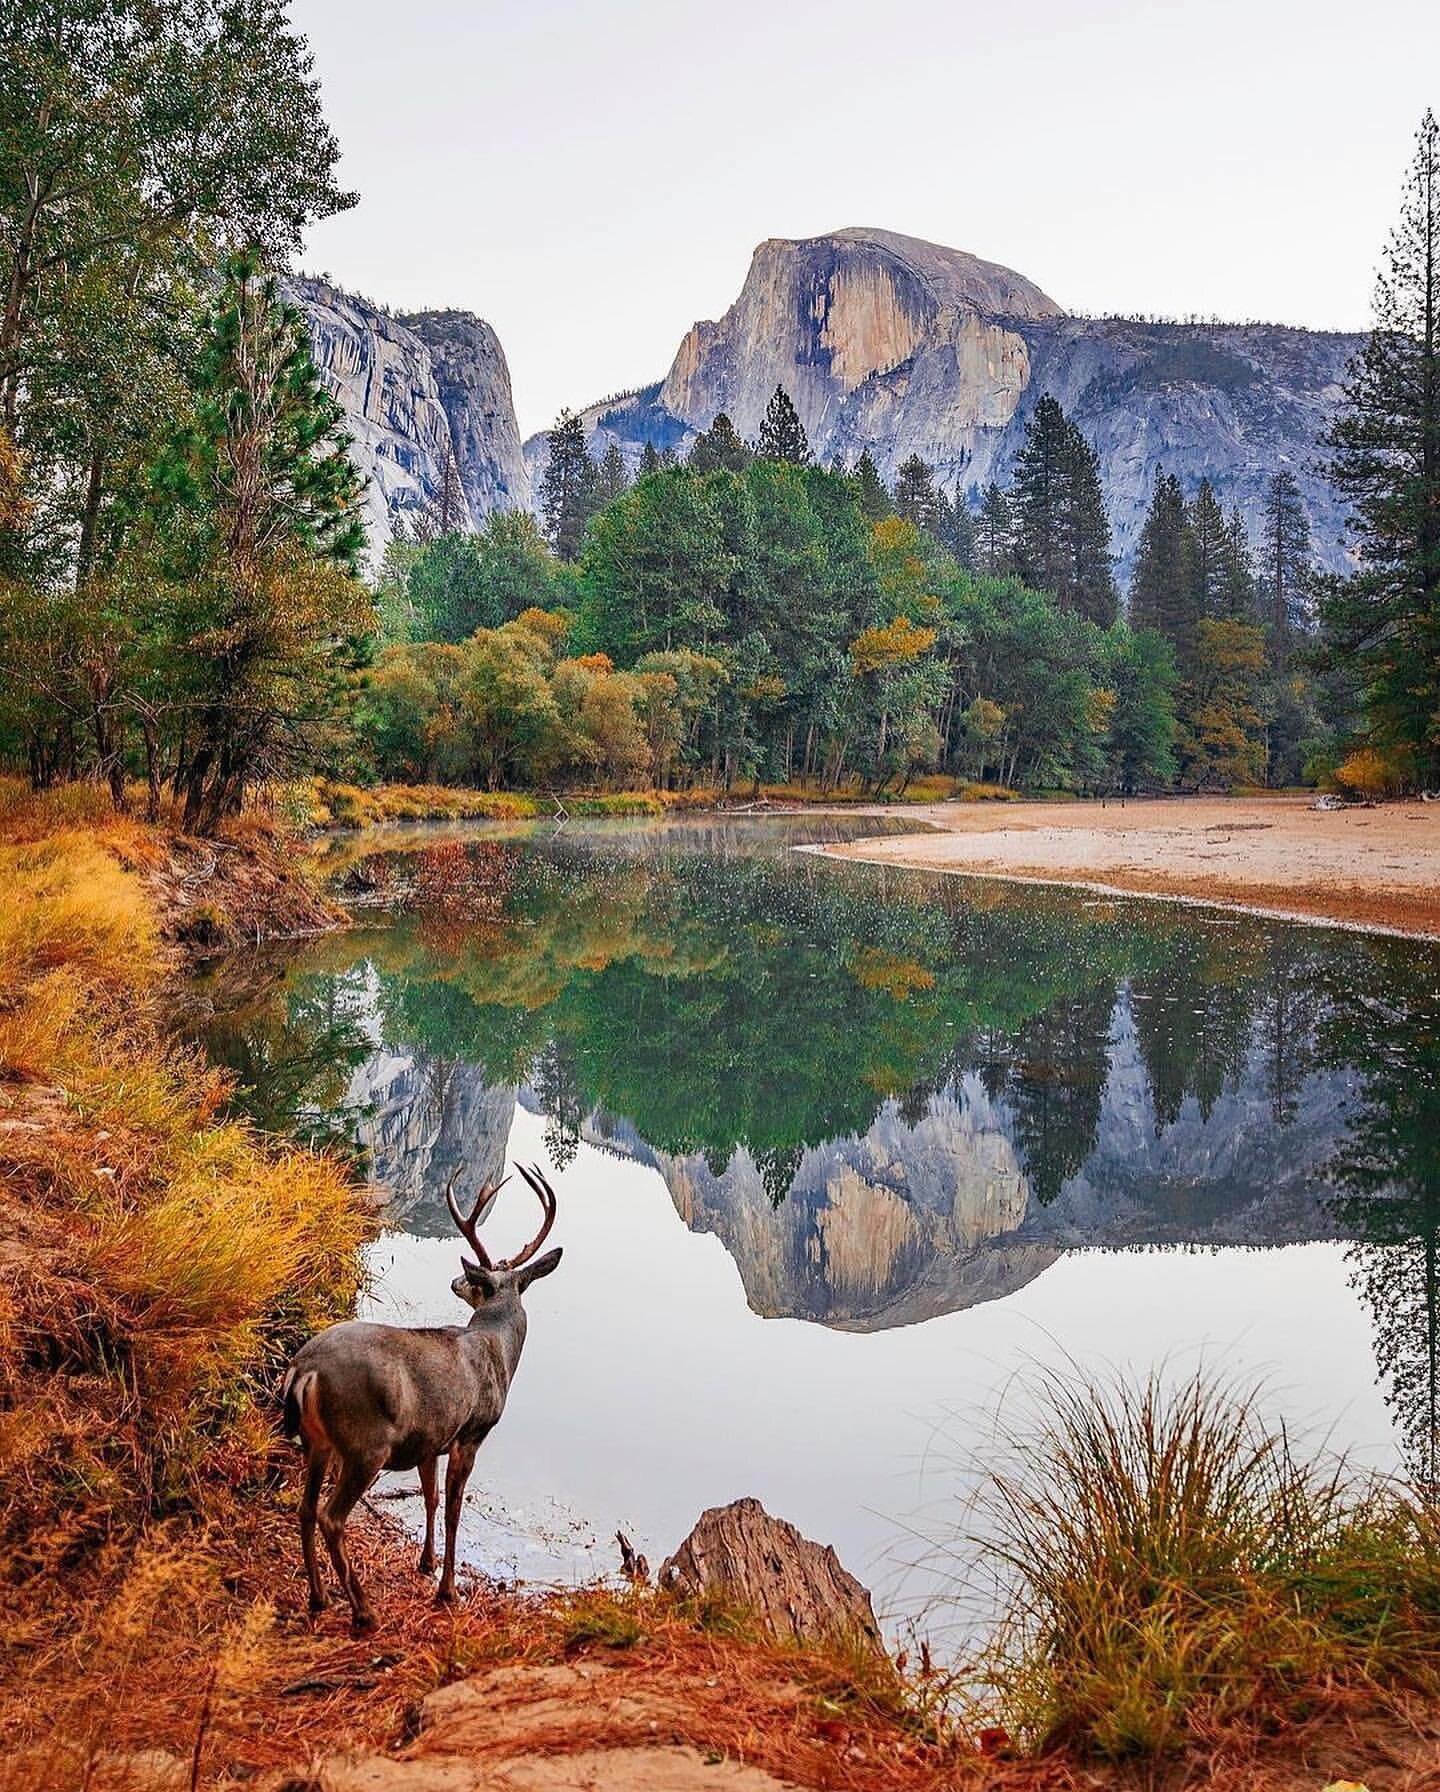 Travel Tuesday - Let&rsquo;s Go!
Do you like to hike?

Rising nearly 5,000 feet above Yosemite Valley and 8,800 feet above sea level, Half Dome is a Yosemite icon and a great challenge to many hikers!

Best Things To Do:
- Camping
- Lodging
- Hiking
